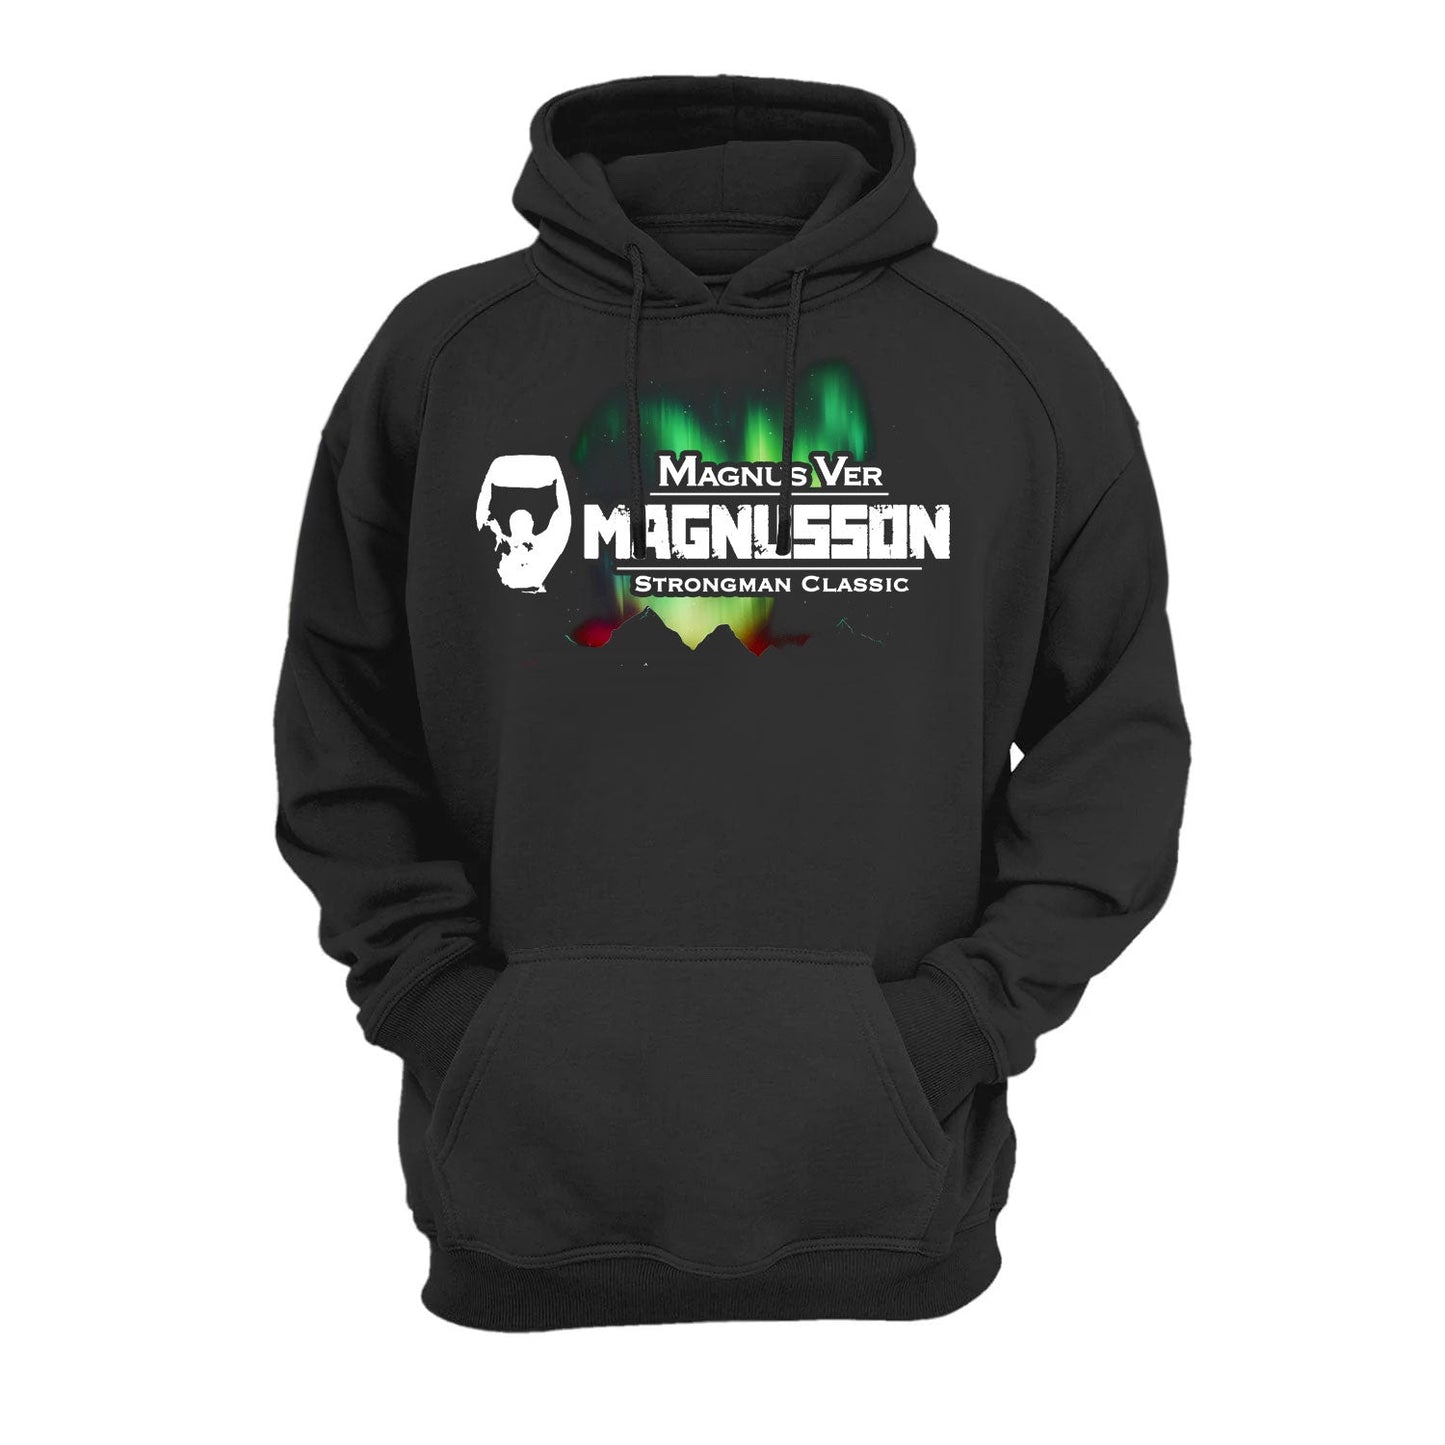 Official Theodor Mar Magnus Classic Hoodie - WORLD FINALS ICELAND 2023